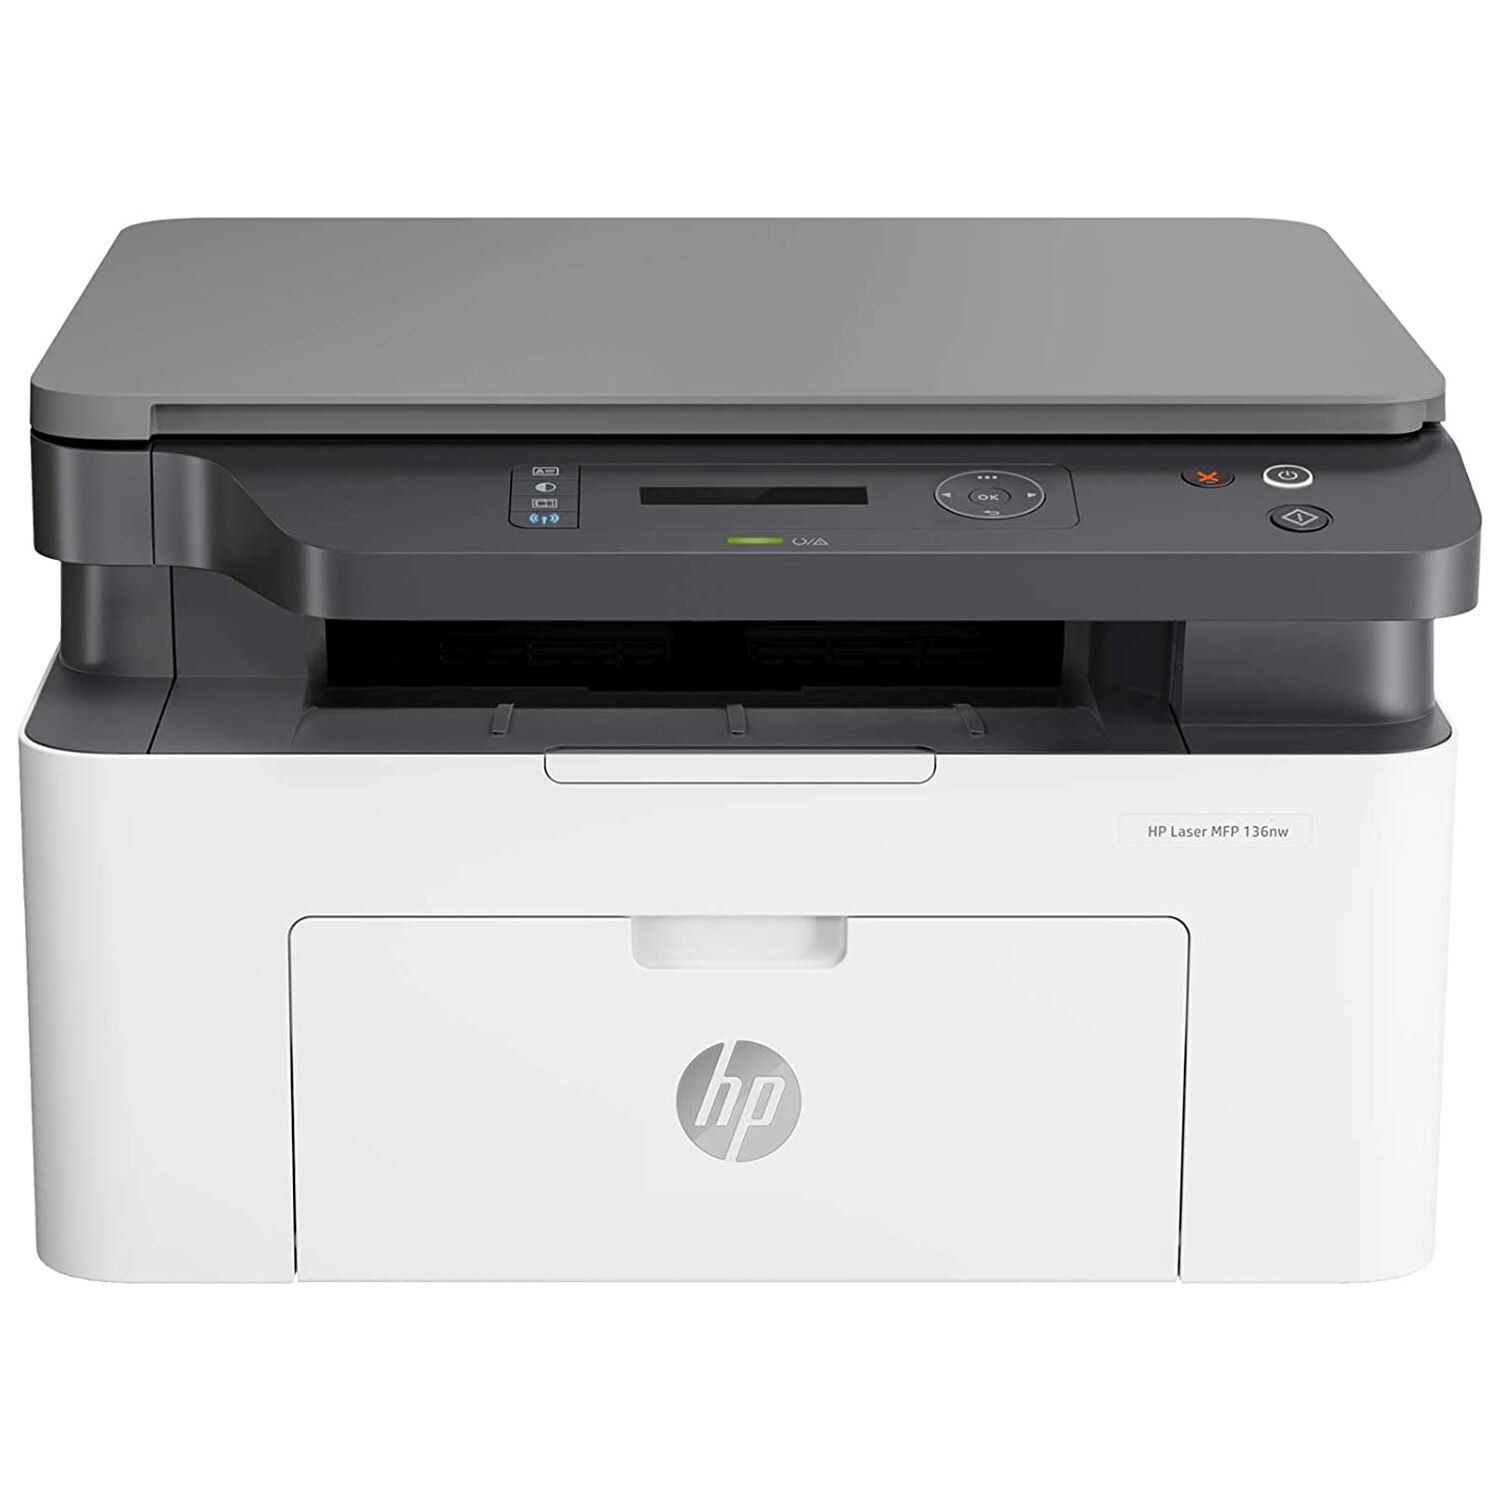 Hp Multifunction Laser MFP Printer, 136NW, Black and White